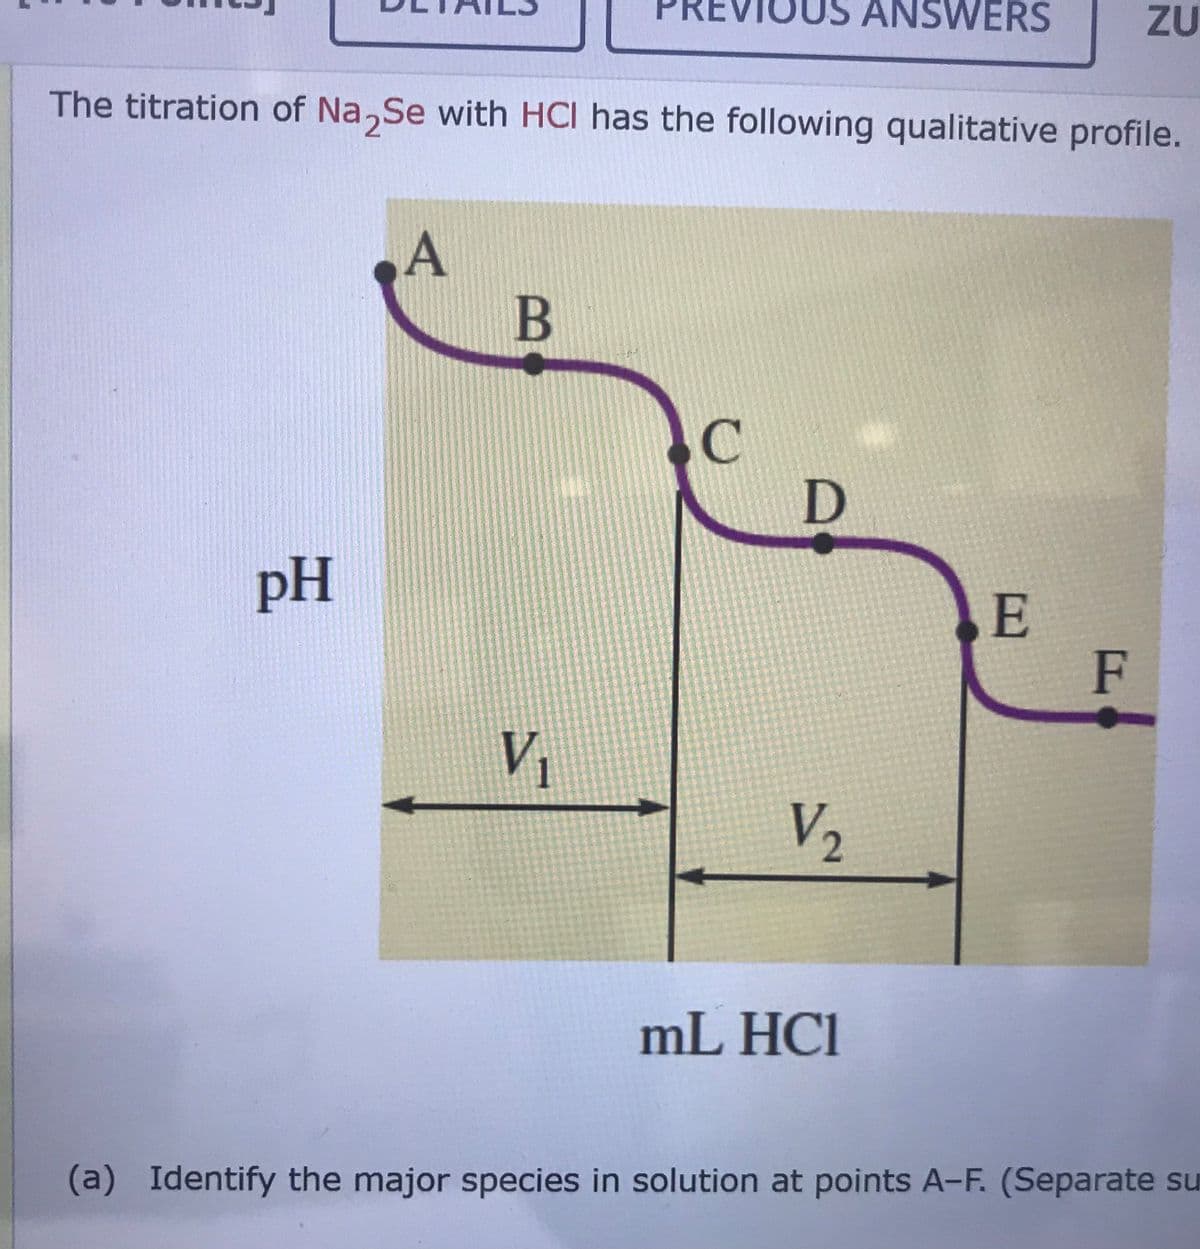 ANSWERS
ZU
The titration of Na,Se with HCI has the following qualitative profile.
A
B
pH
E
F
V
V2
mL HCl
(a) Identify the major species in solution at points A-F. (Separate su
